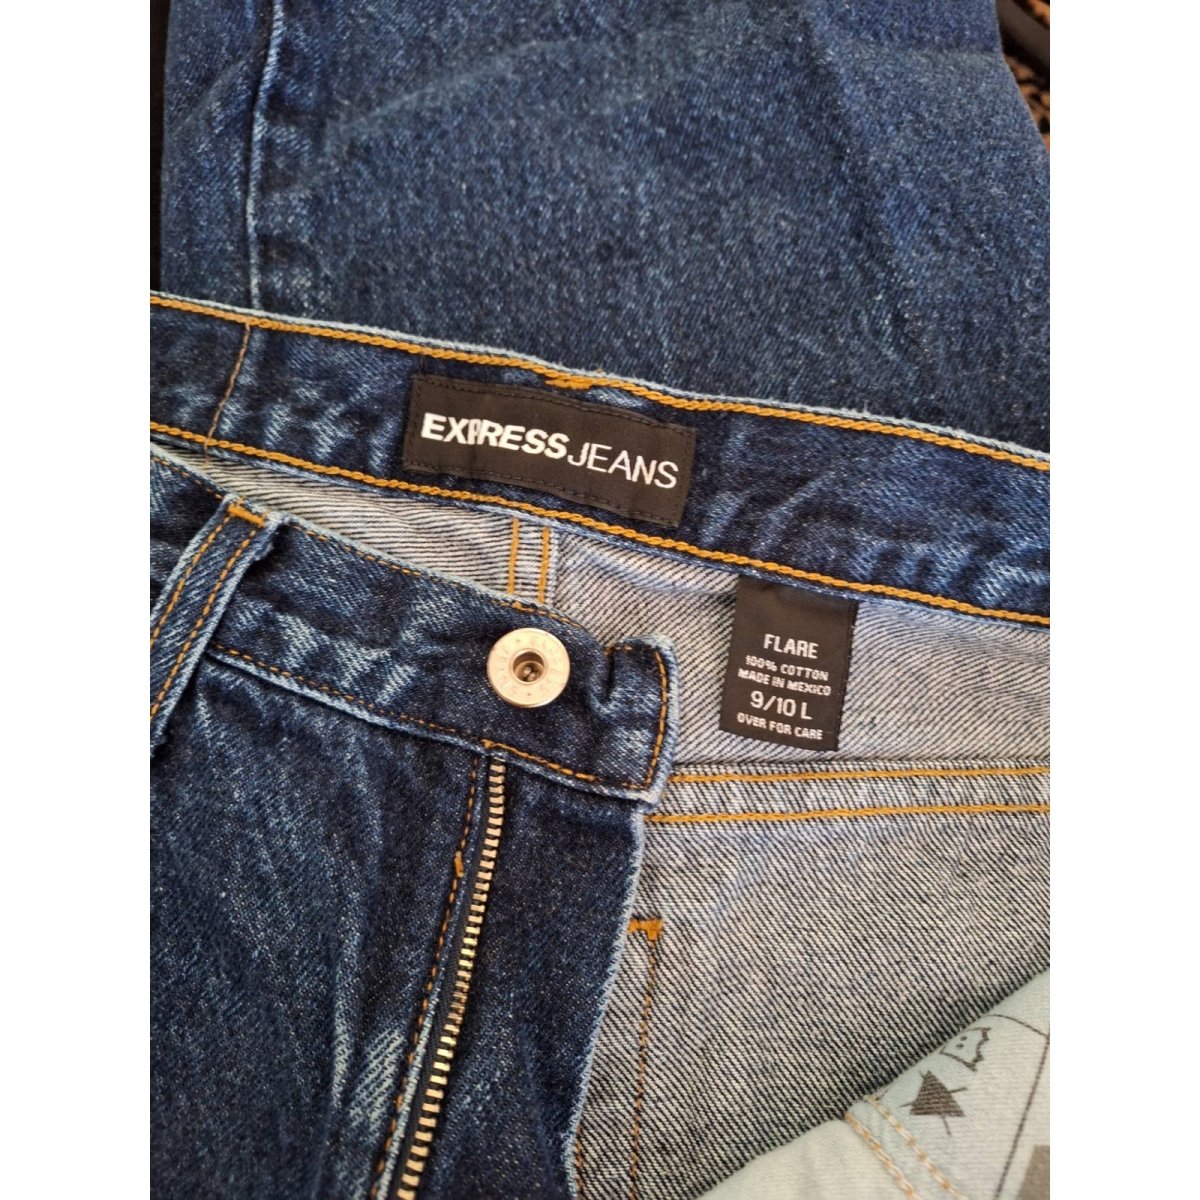 Y2K Dark Stone Wash Mid Rise Flared Jeans Size 9/10 Long 32x33 - themallvintage The Mall Vintage